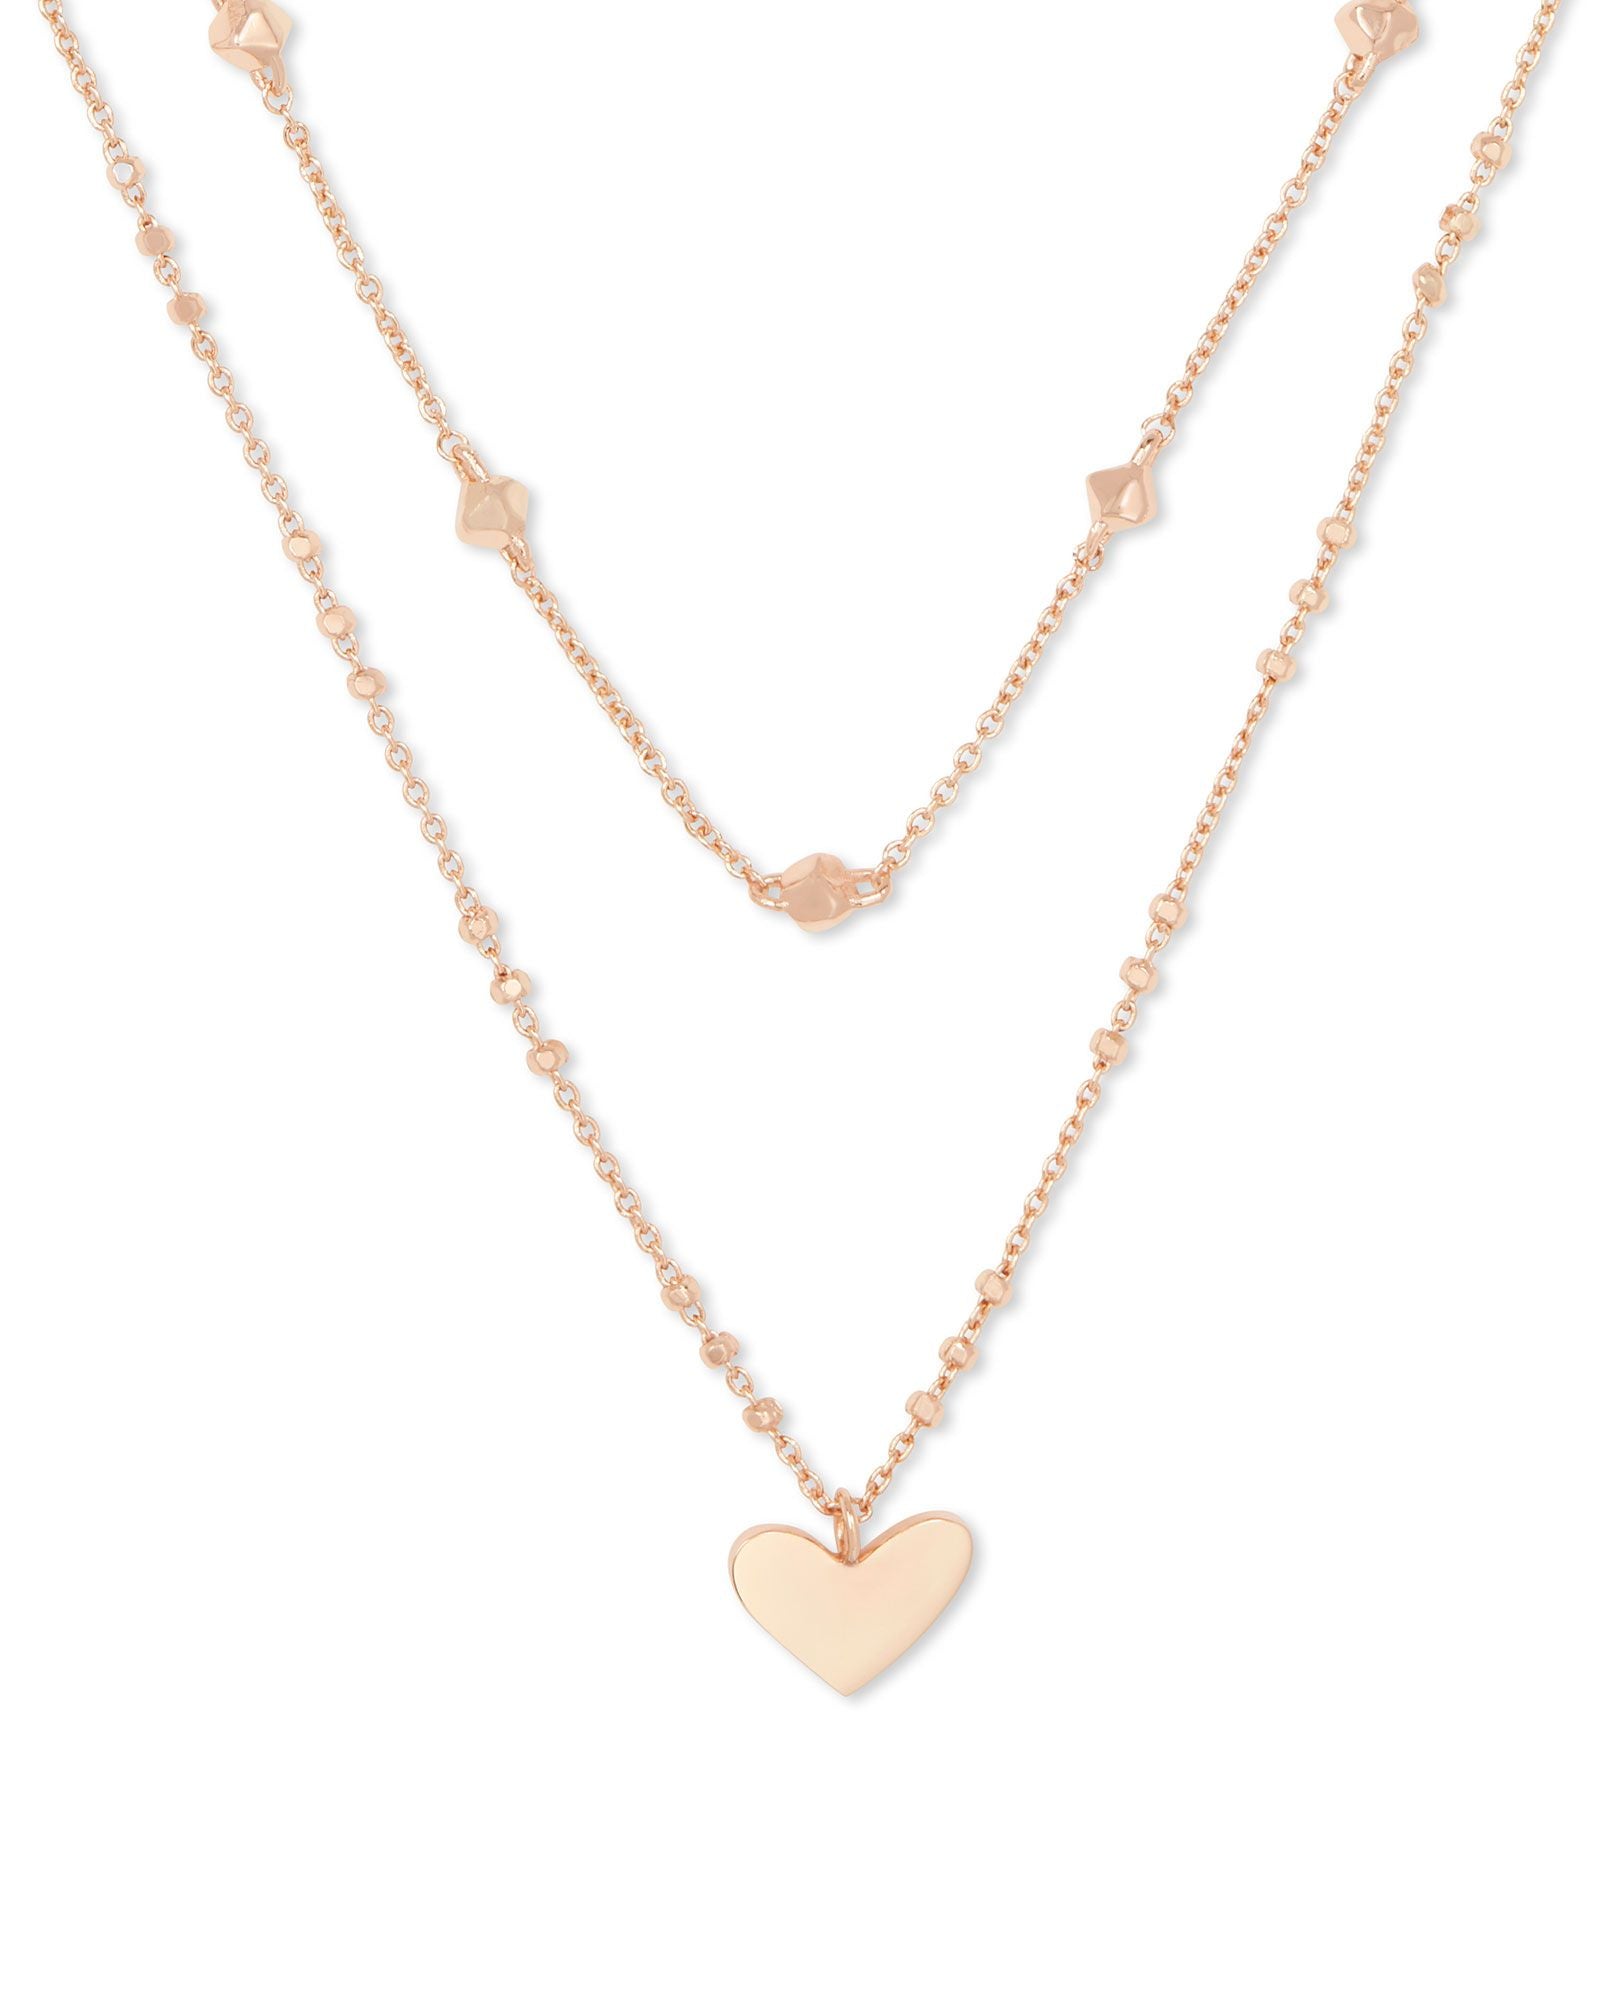 Kendra Scott | Ari Heart Multi Strand Necklace in Rose Gold - Giddy Up Glamour Boutique